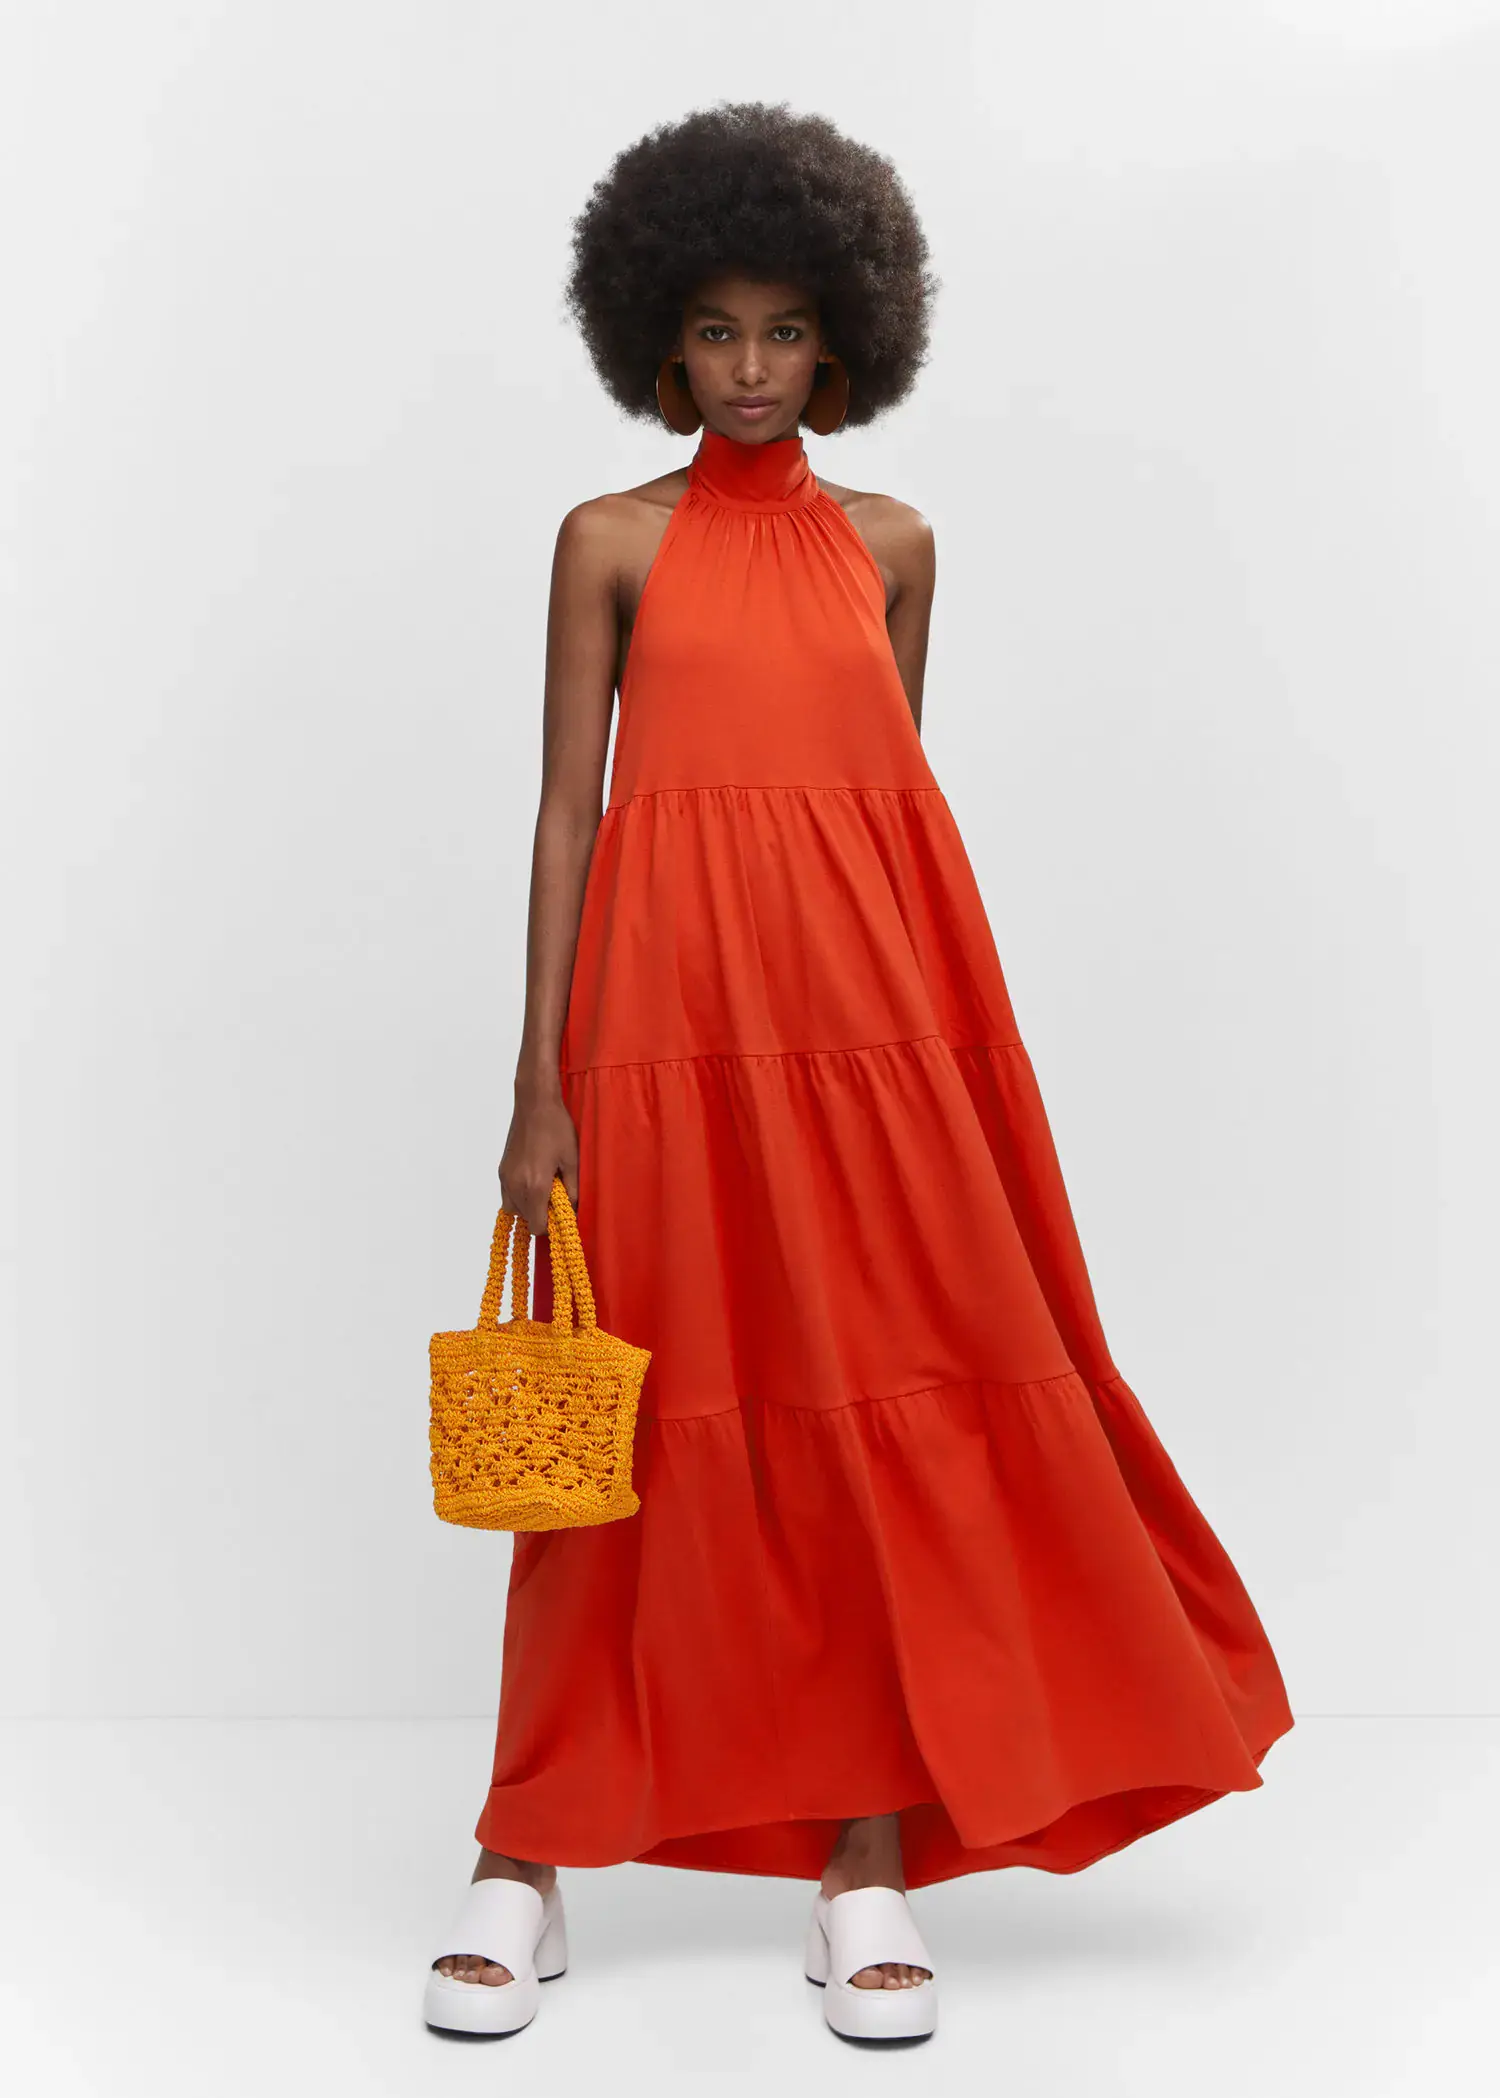 Mango Halter-neck open-back dress. a woman in a red dress holding a yellow bag. 